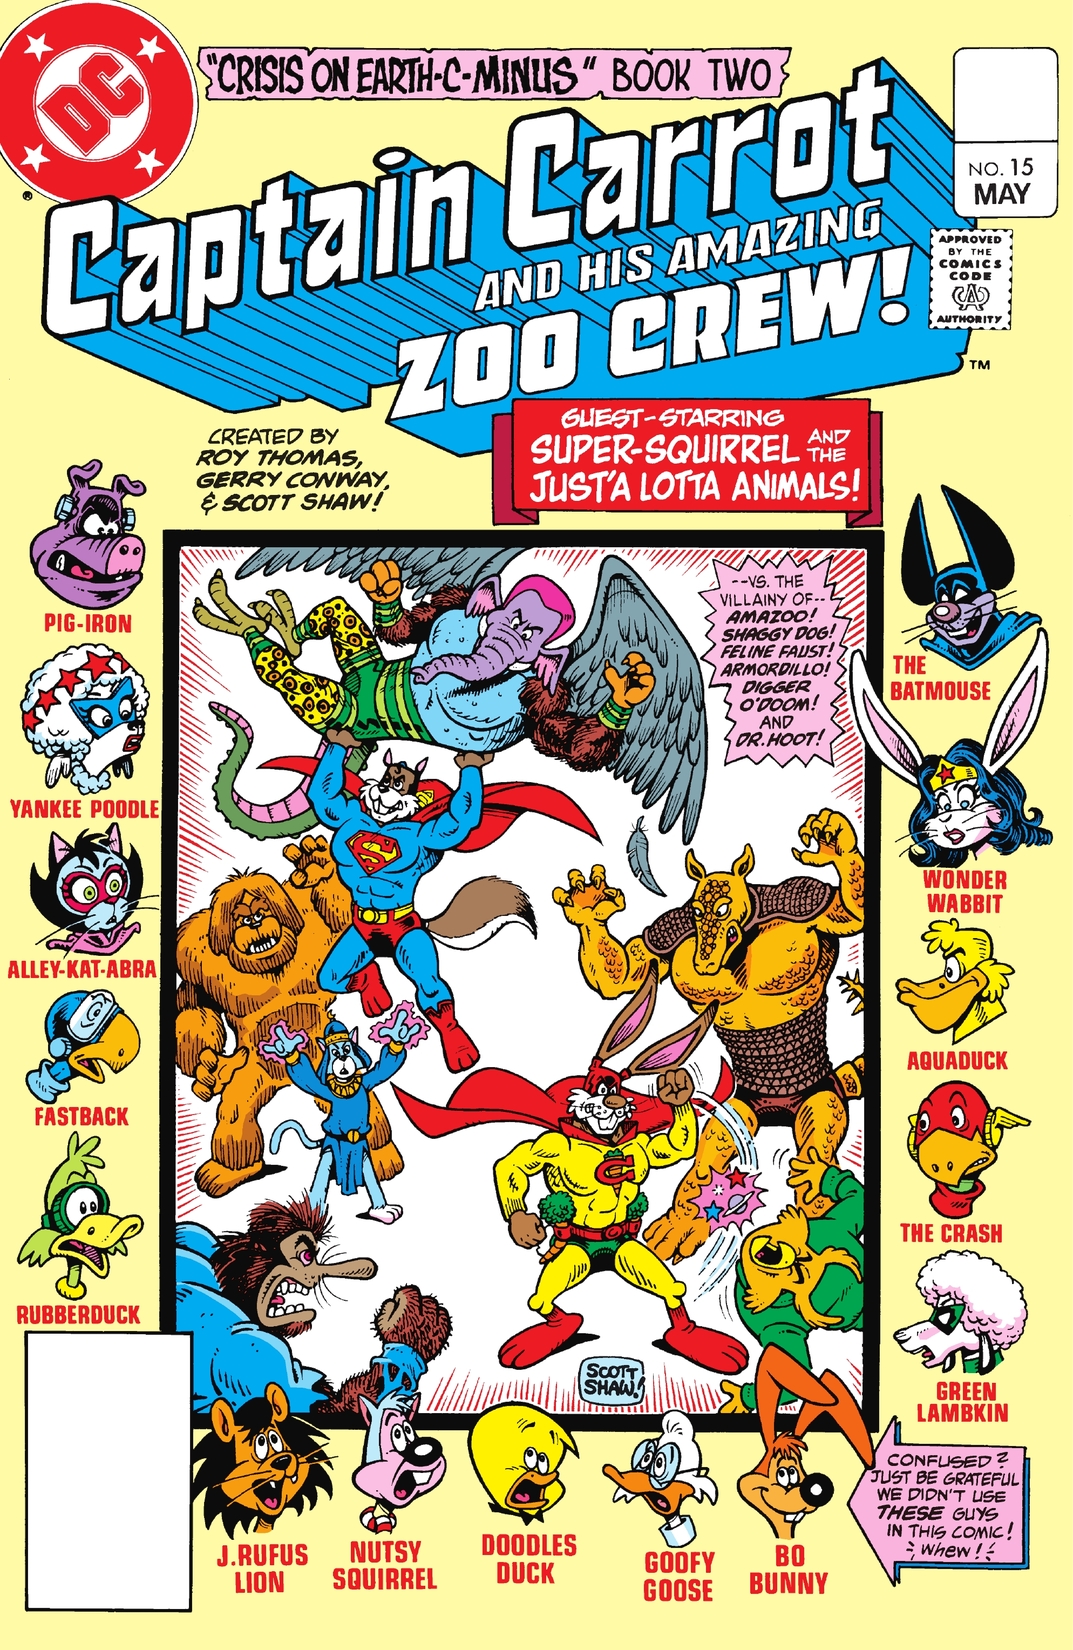 Captain Carrot and His Amazing Zoo Crew #15 preview images